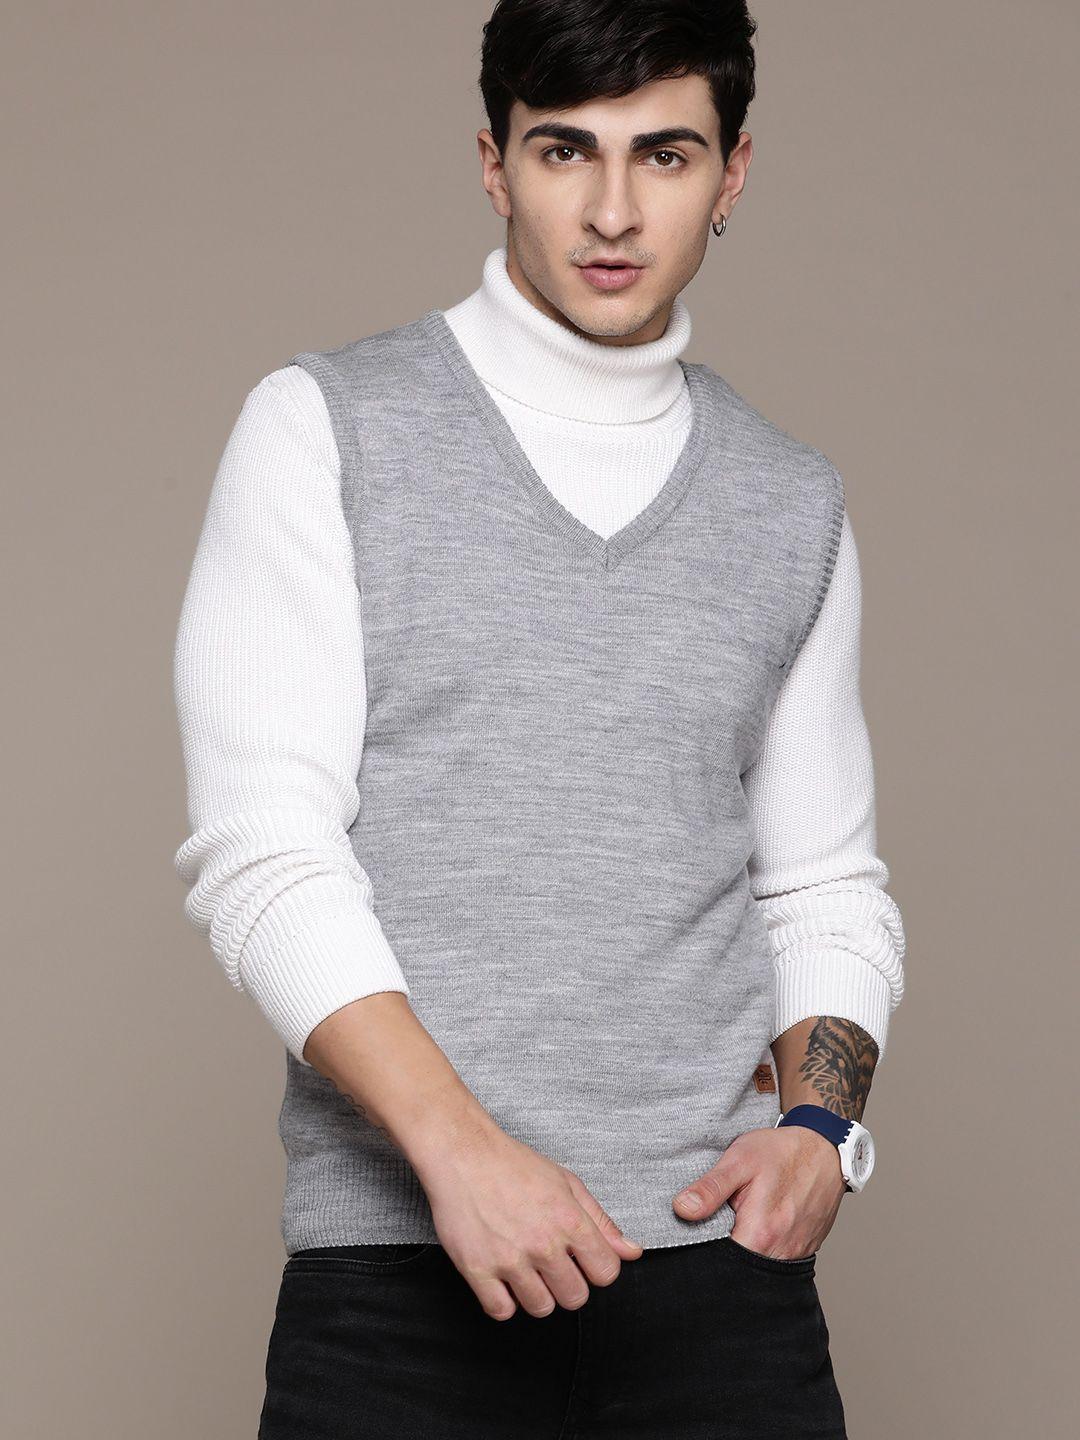 the roadster lifestyle co. solid v-neck acrylic sweater vest